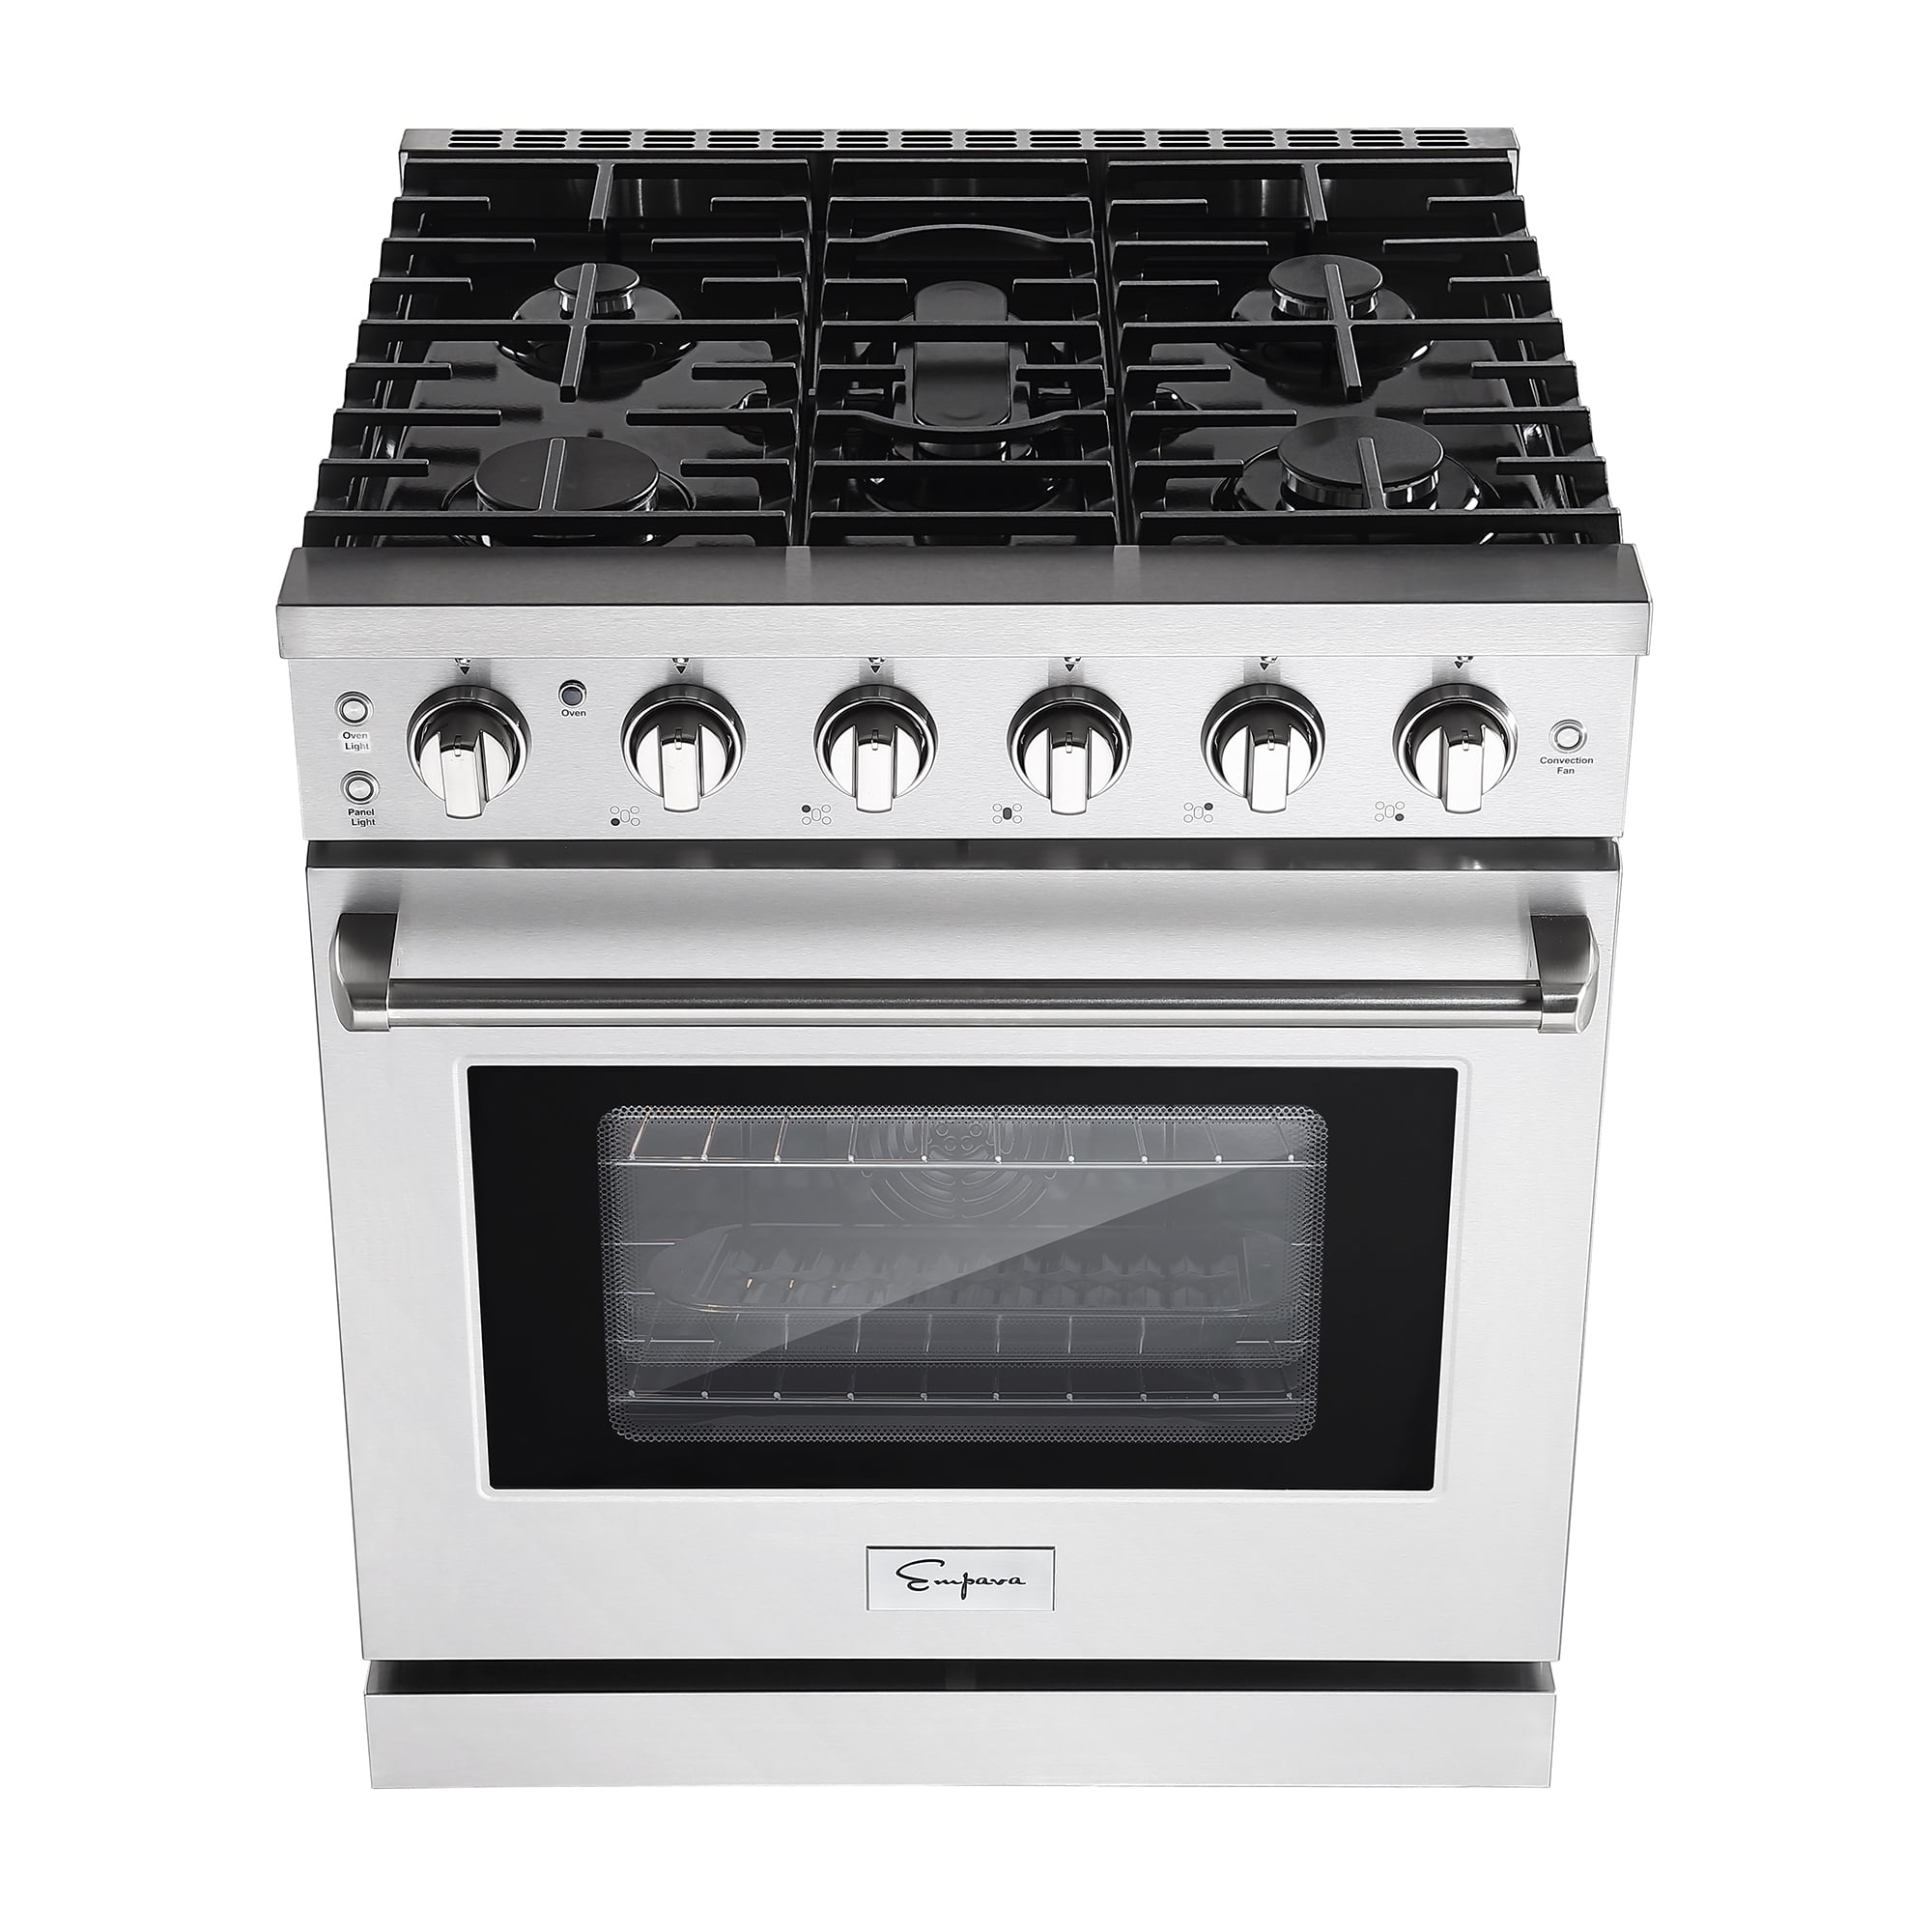 Magic Chef MCSWOE24S 24in 2.2 Cu ft Electric Wall Oven, Assembled Product H  23.4in W 21.8in D 23.4in 